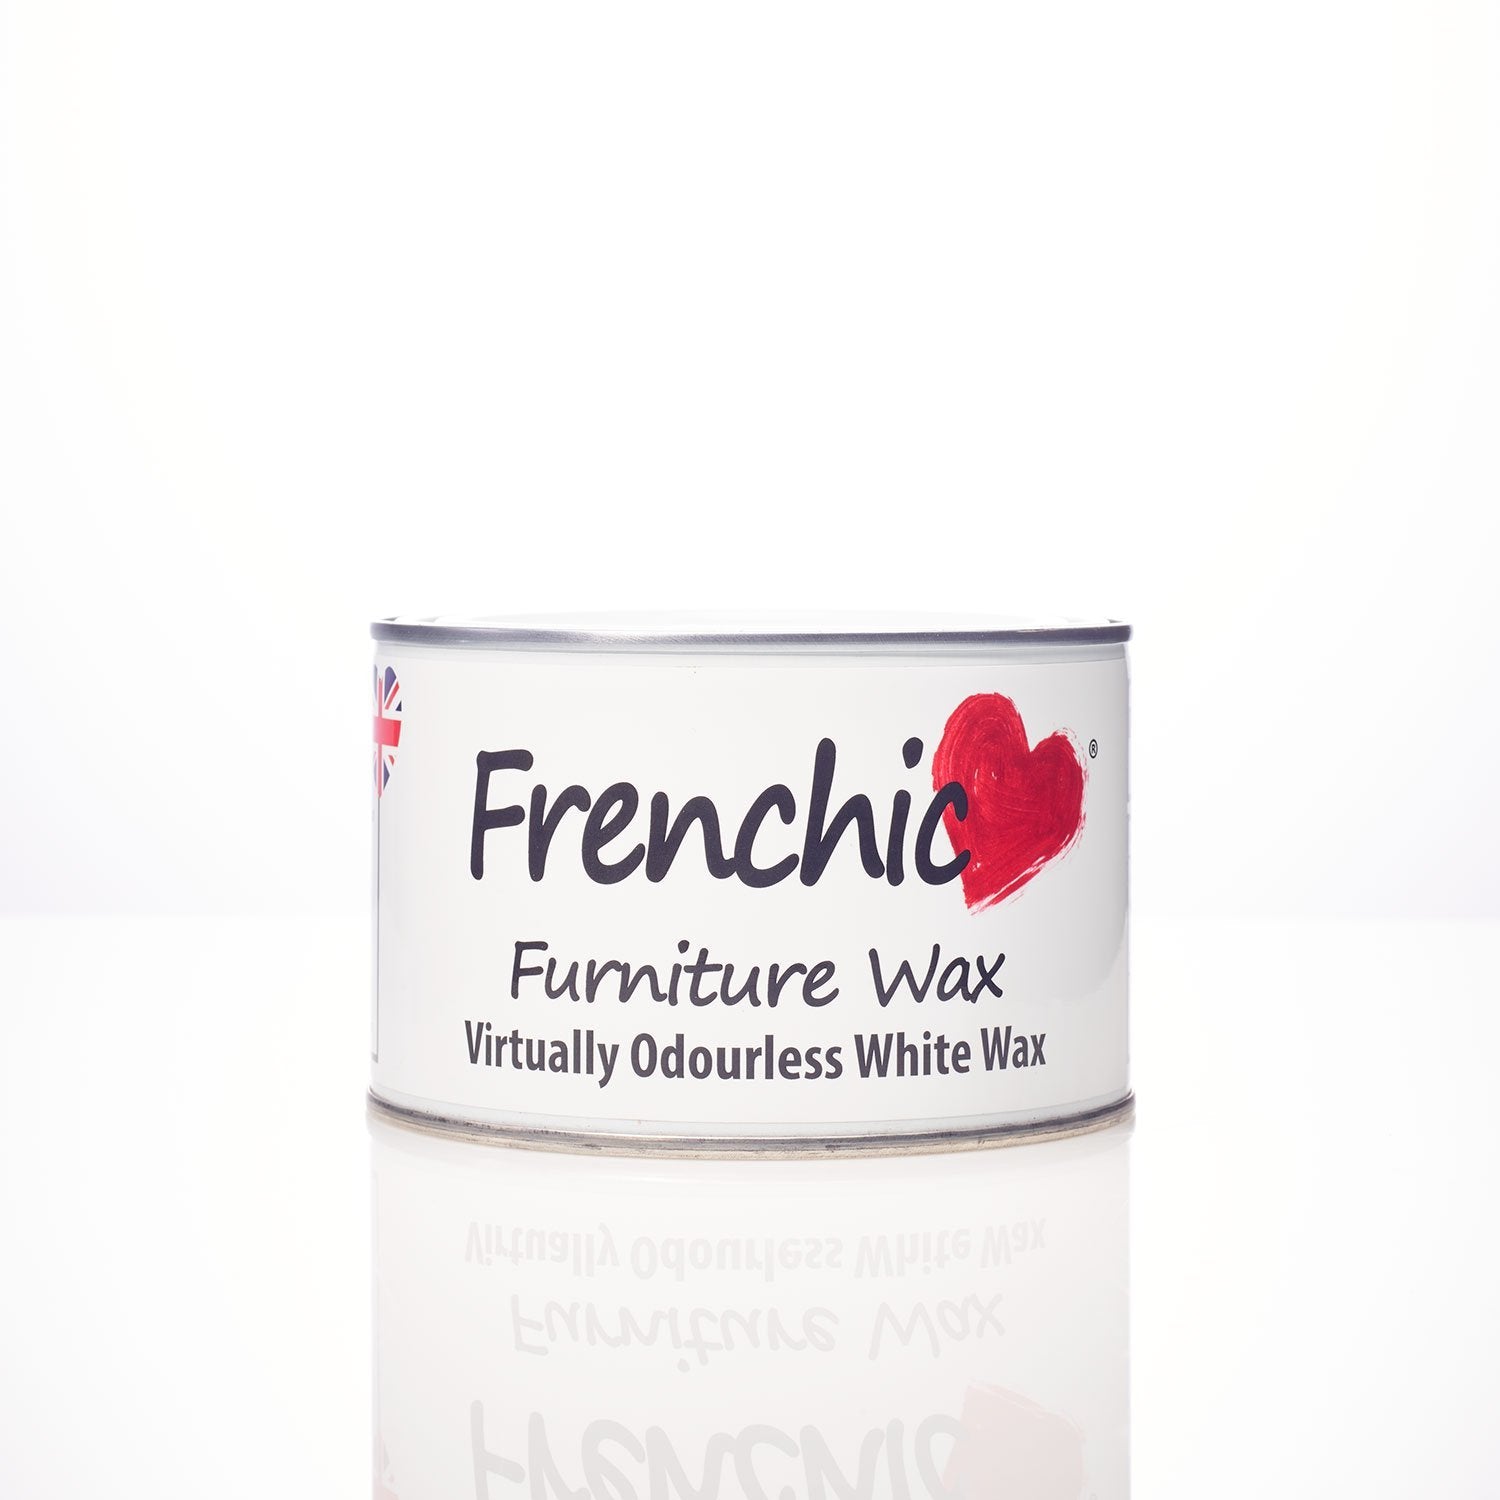 Frenchic Paint | White Wax by Weirs of Baggot St